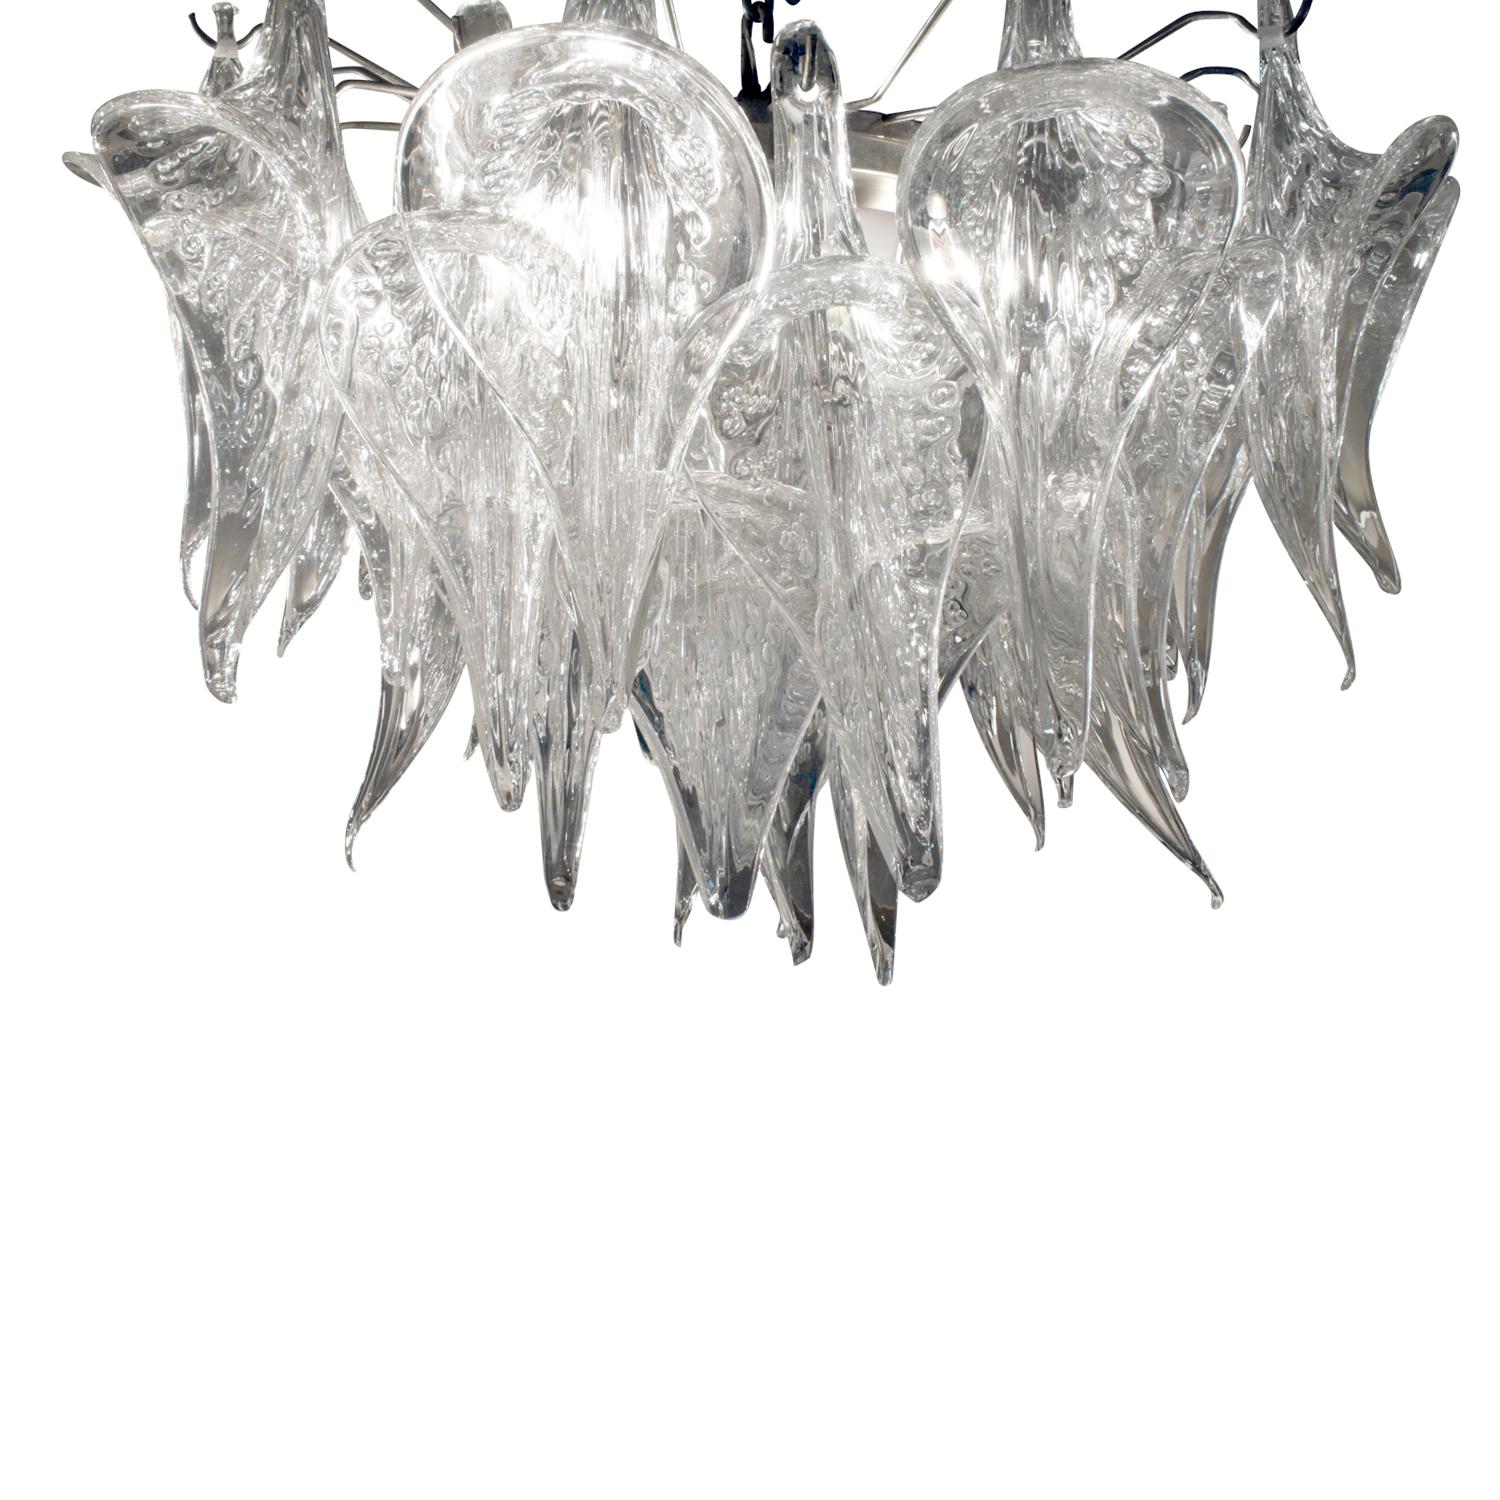 Chandelier with sculptural hand-blown pulegoso glass (with air bubbles) horns, Murano Italy, 1970's. This chandelier is very striking.

H: 17 inches (glass part only) / chain can be adjusted to any height.